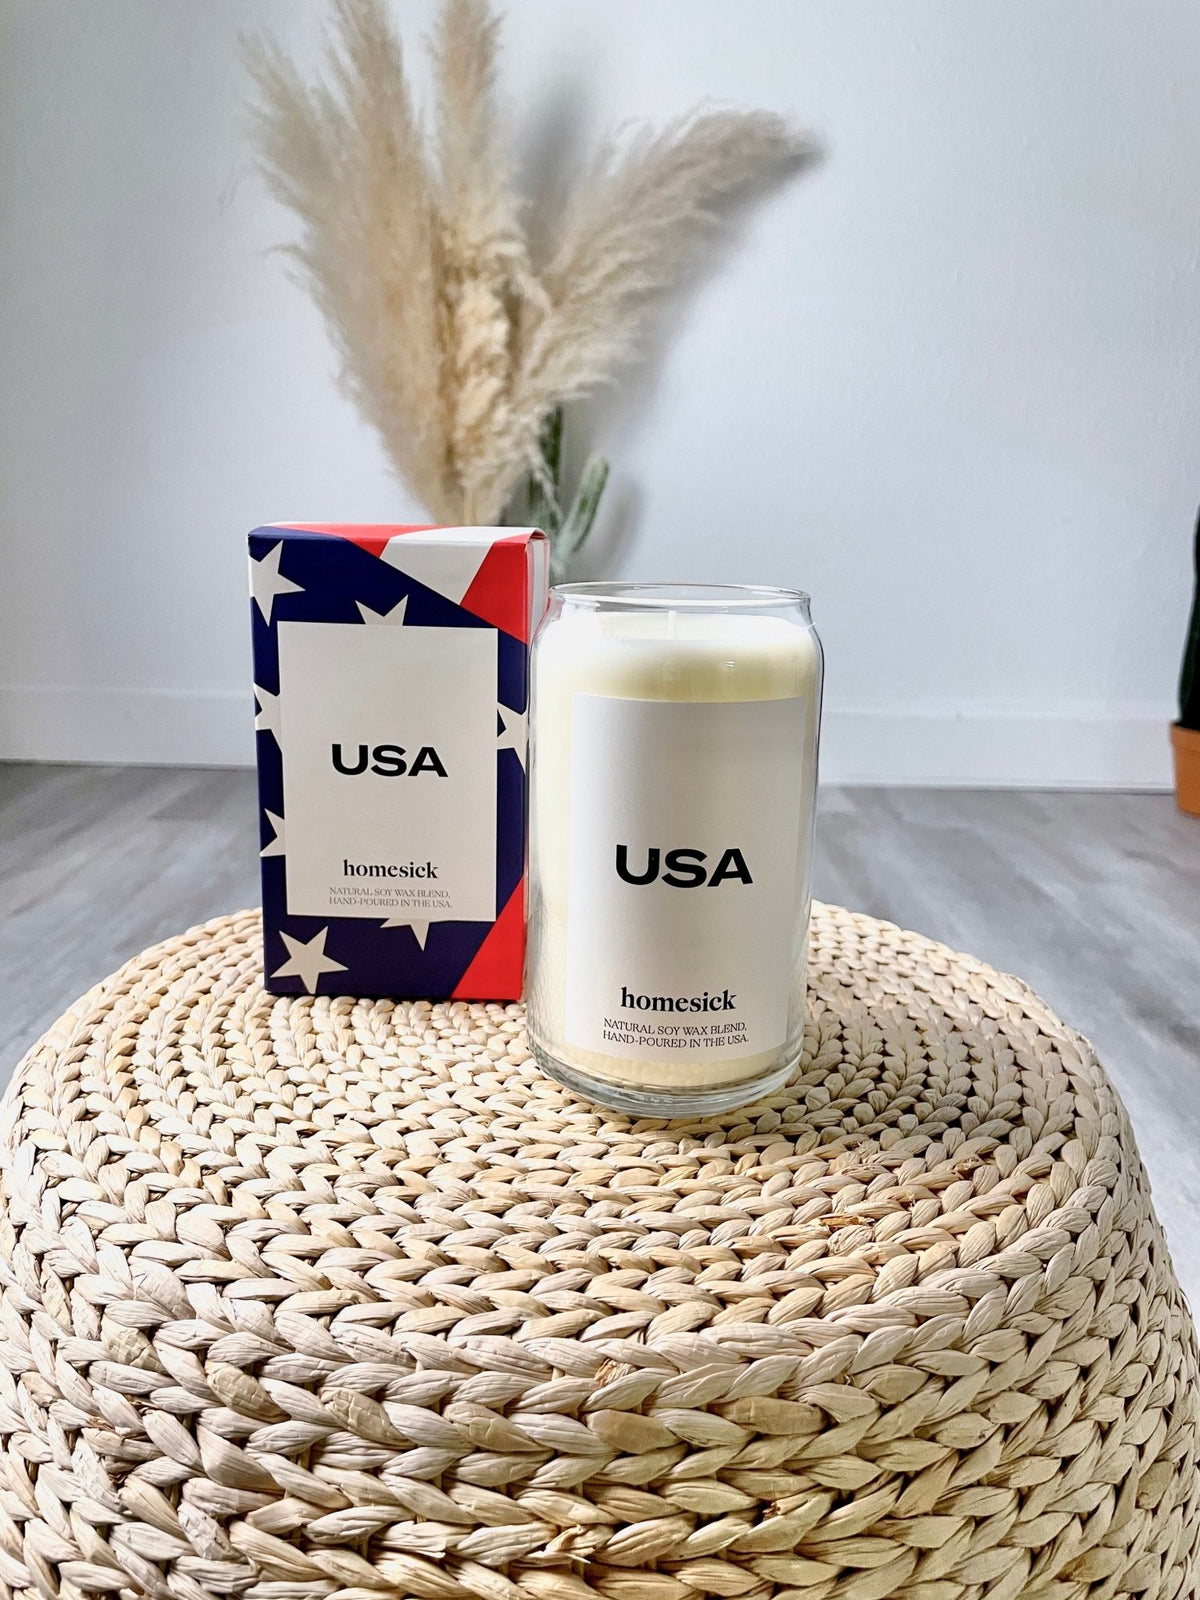 Homesick USA candle - Trendy Candles at Lush Fashion Lounge Boutique in Oklahoma City